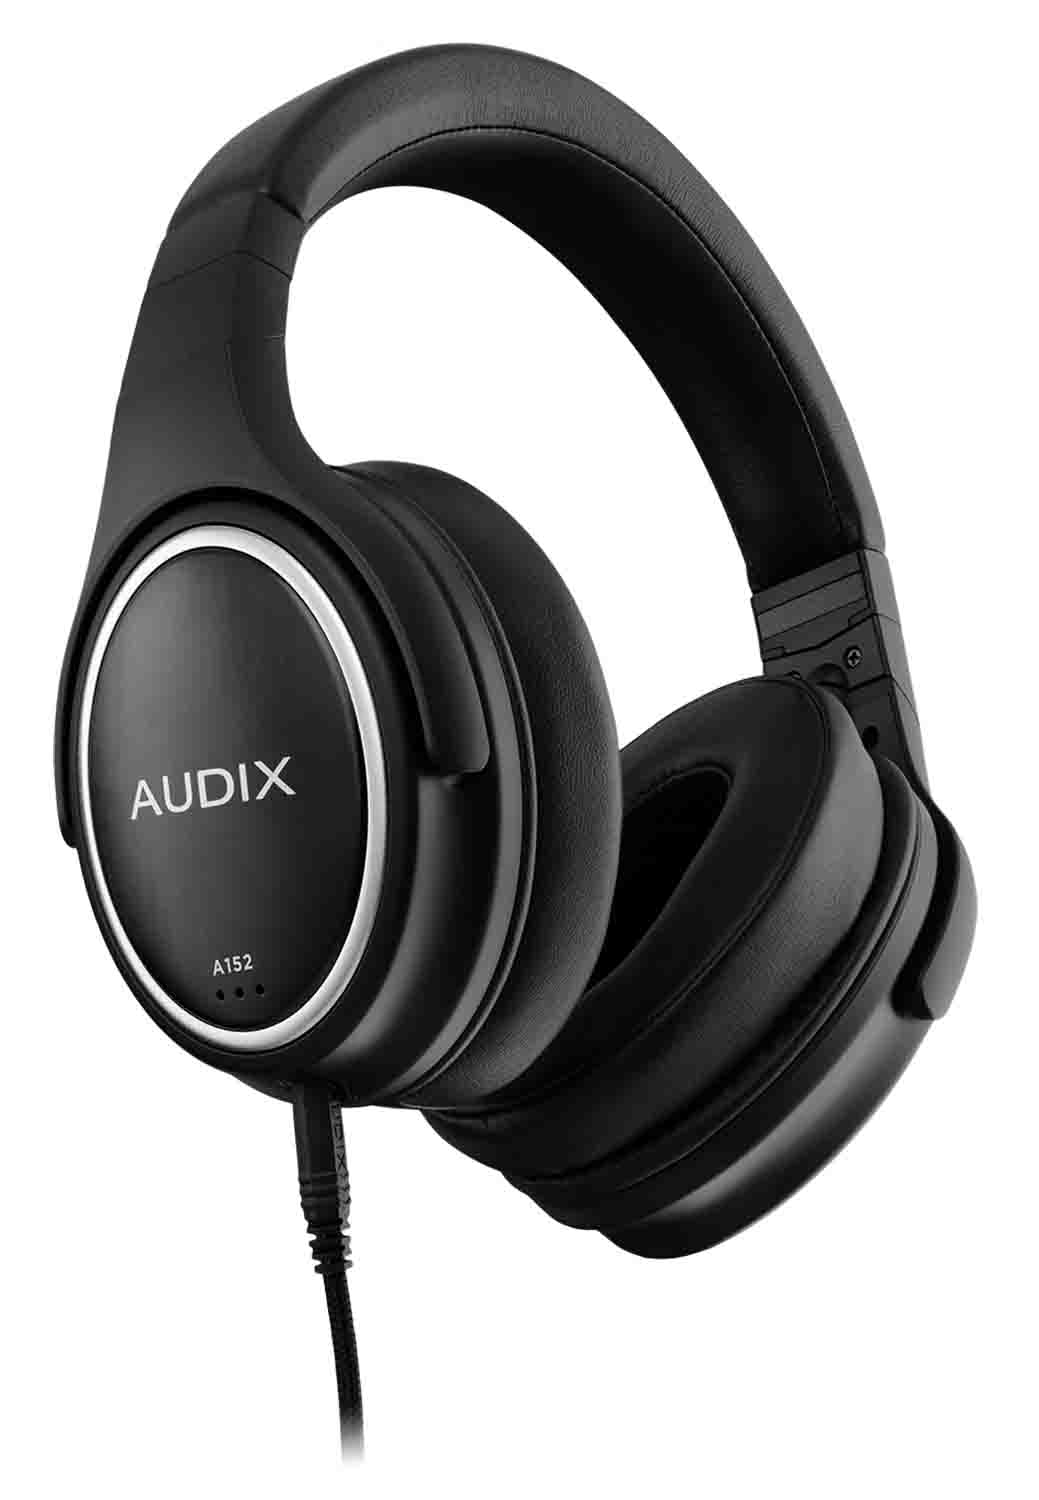 Audix A152 Studio Reference Headphones with Extended Bass - Hollywood DJ